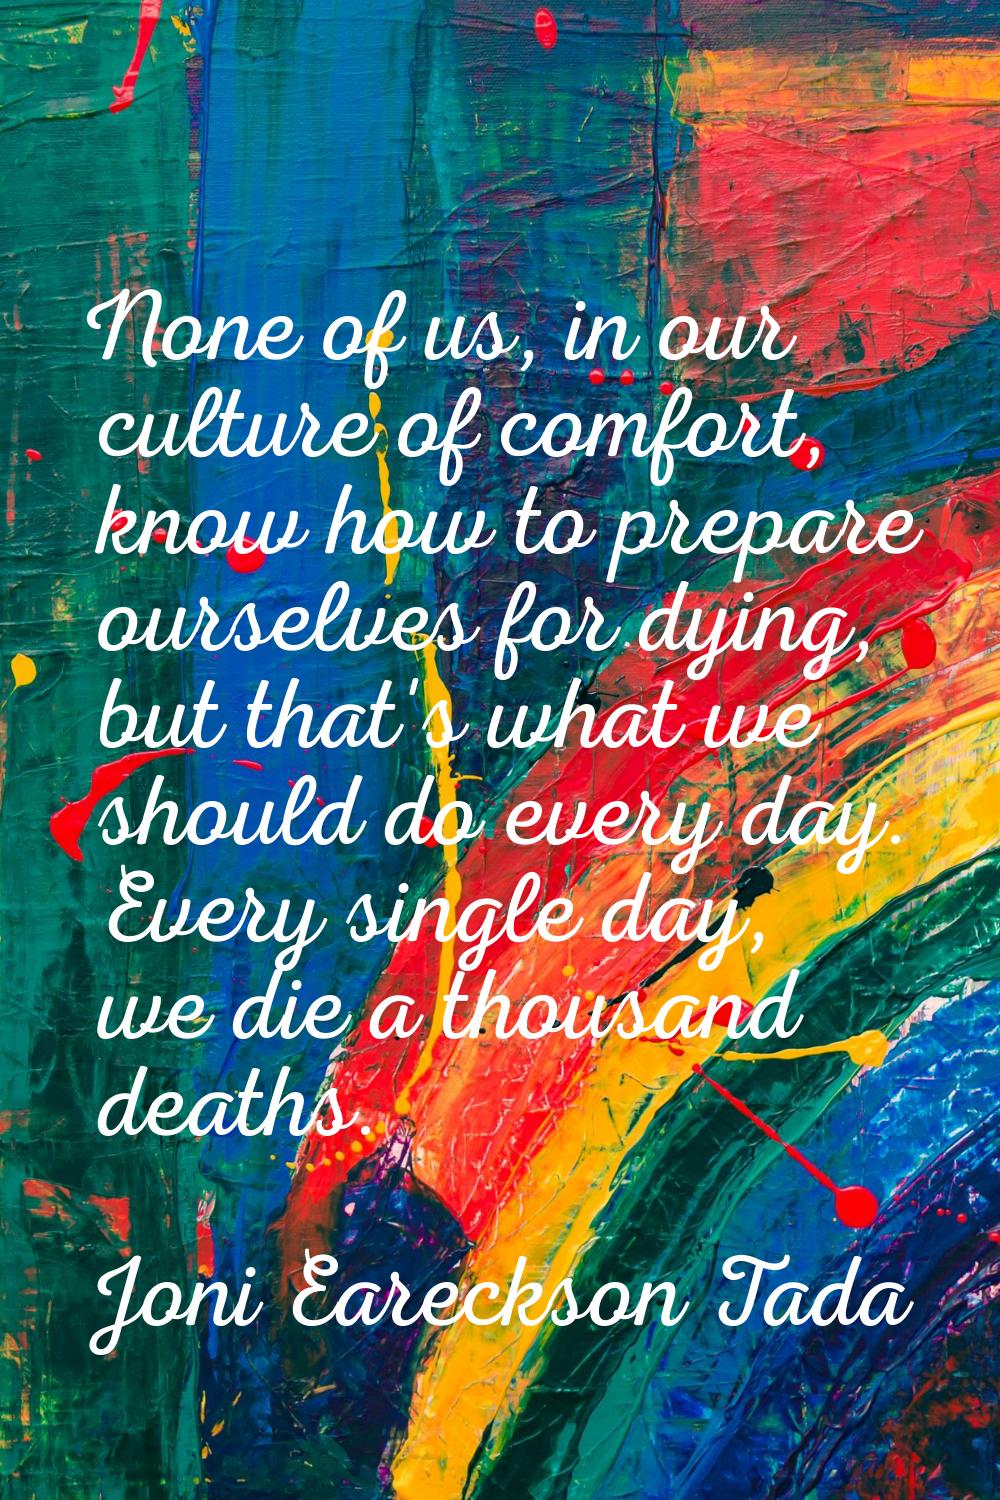 None of us, in our culture of comfort, know how to prepare ourselves for dying, but that's what we 